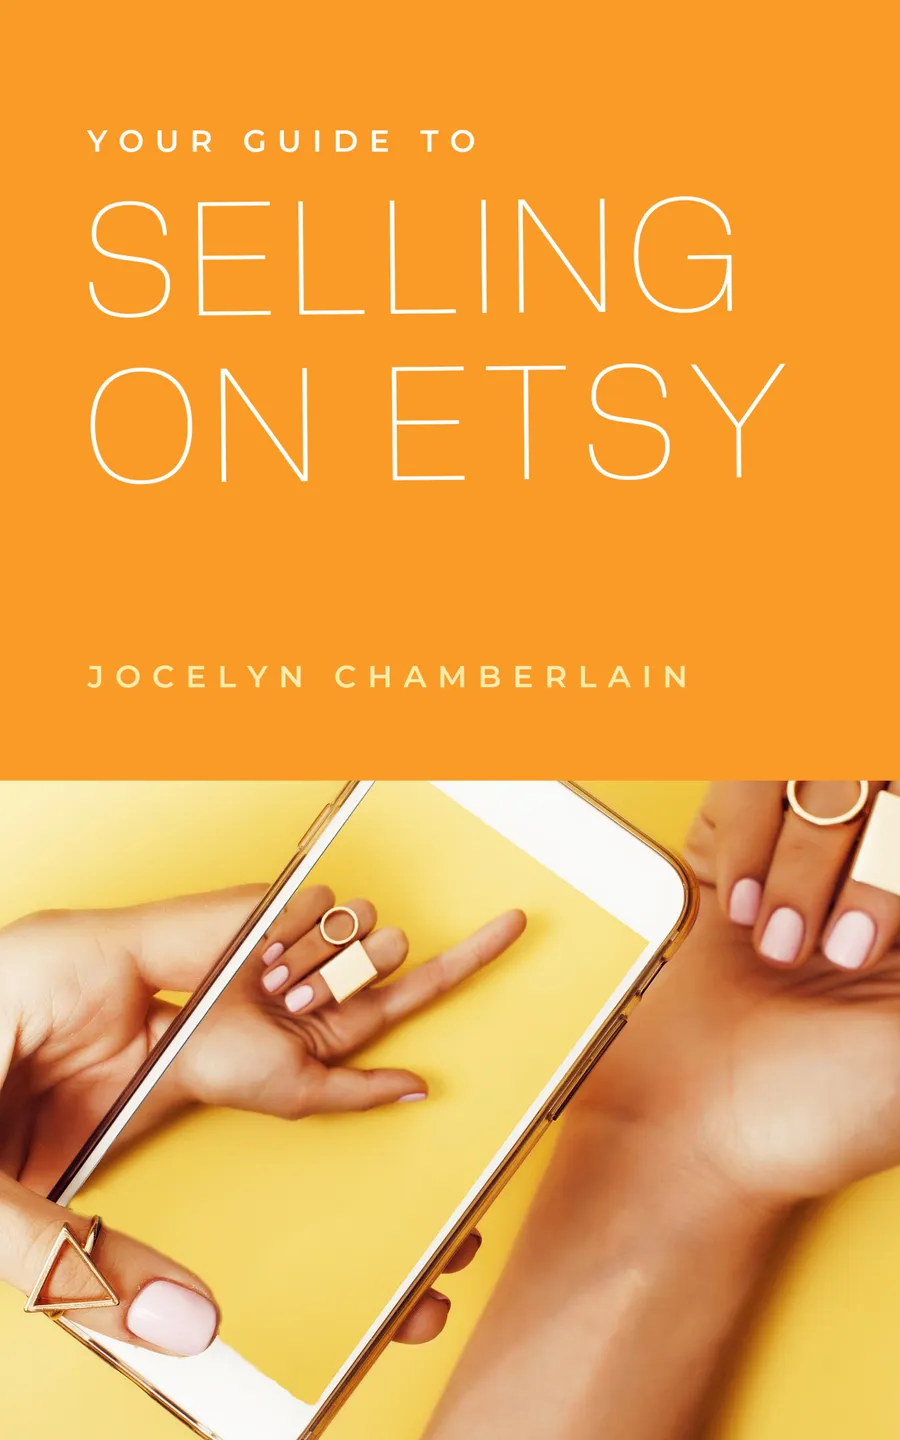 Selling on Etsy etsy template